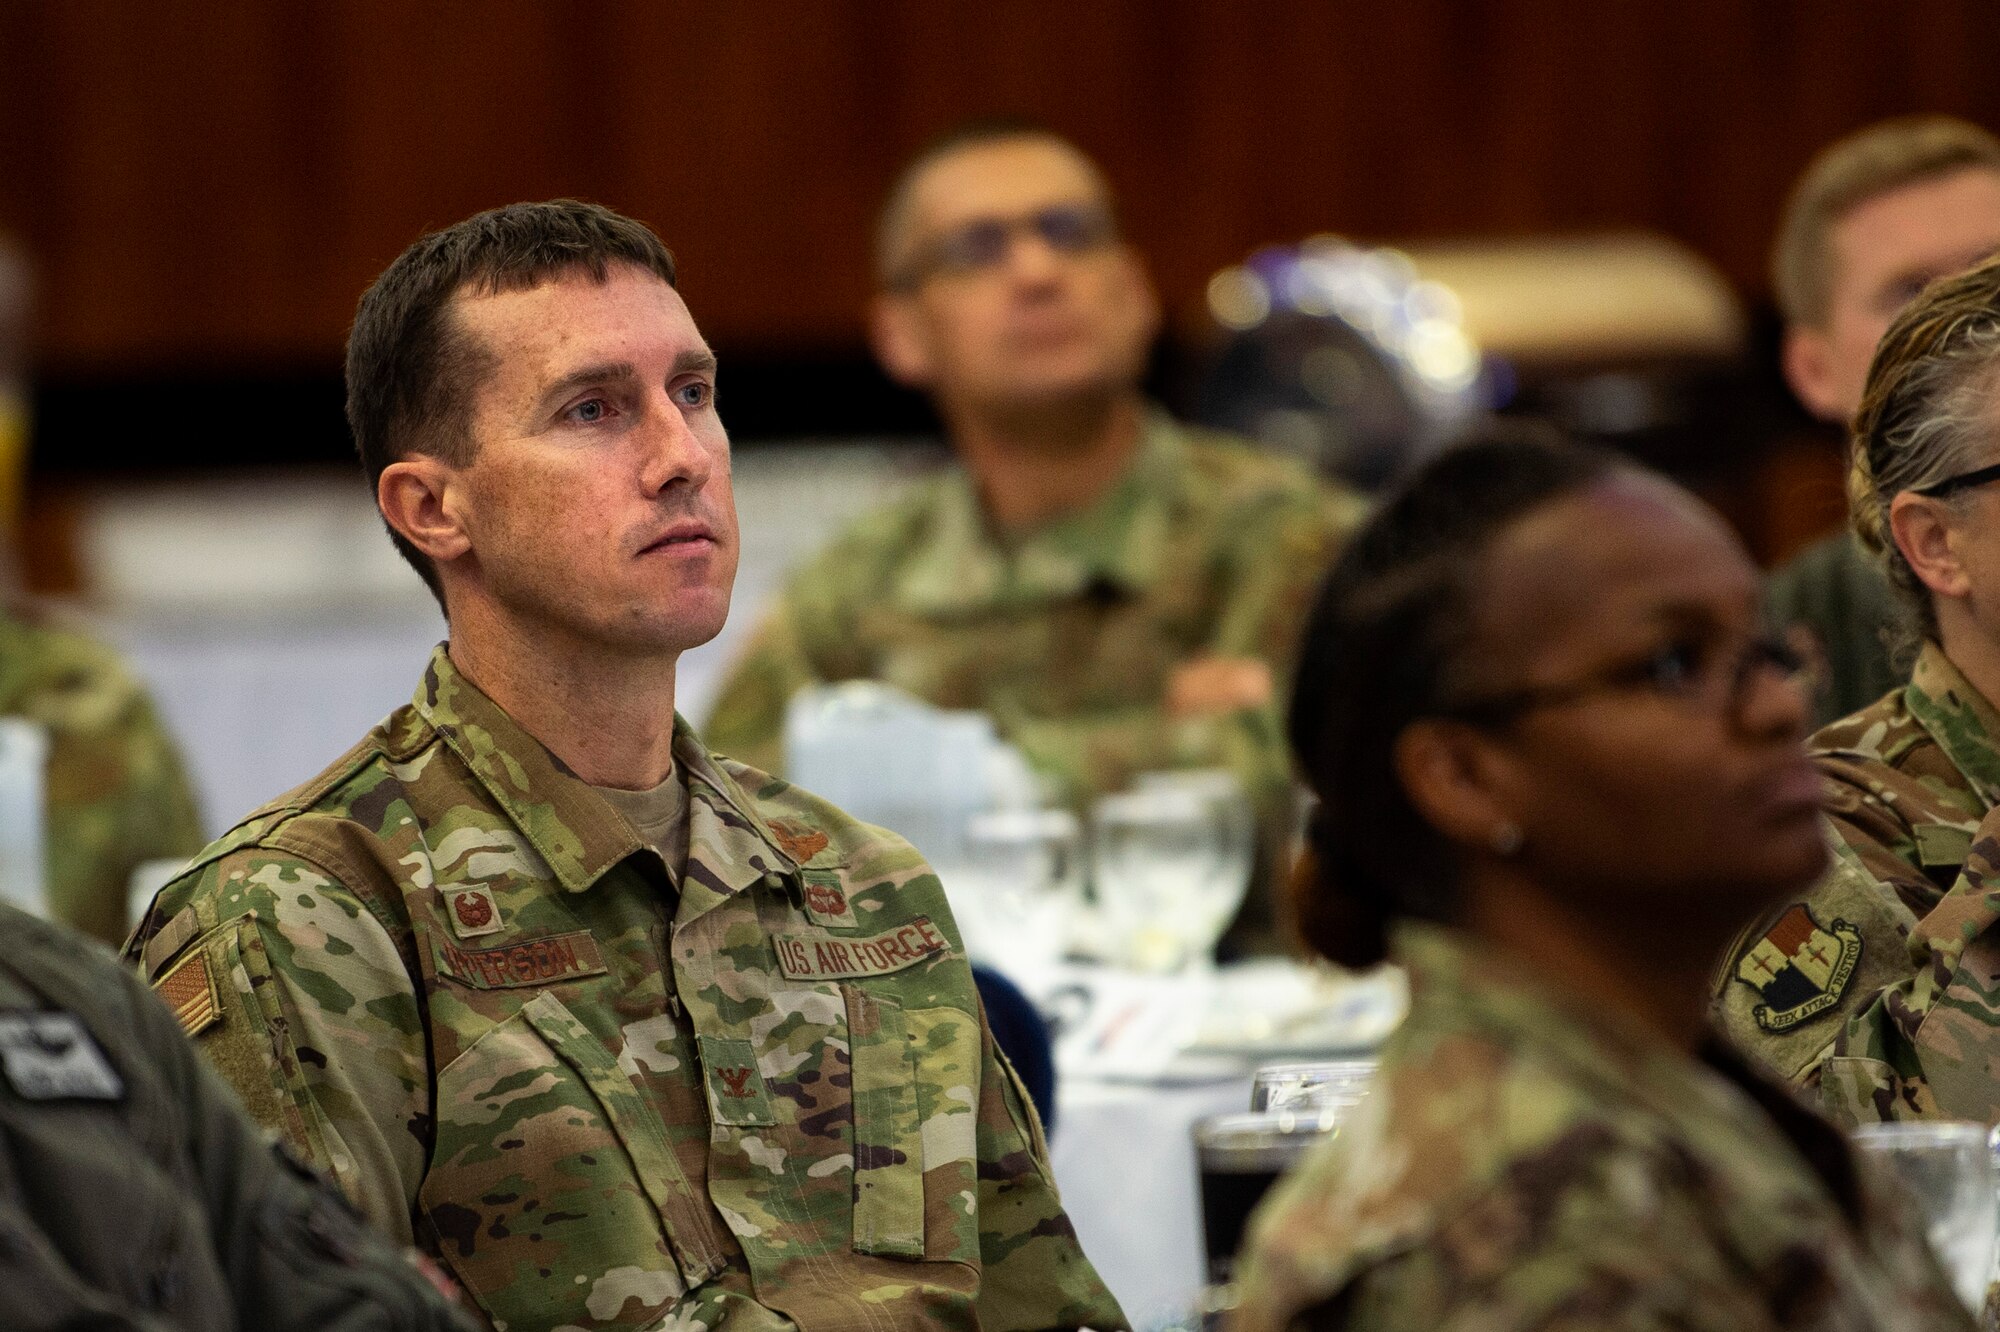 U.S. Air Force Col. David Epperson, 52nd Fighter Wing commander, left, attends the annual Prisoner-of-War and Missing-in-Action Recognition Ceremony at Spangdahlem Air Base, Germany, Sept. 6, 2019. The goal of the event was to remind Airmen of the brave men and women who have been captured or gone missing in action. The base honor guard performed a POW/MIA table ceremony and a guest speaker shared stories of missing service members. (U.S. Air Force photo by Airman 1st Class Valerie Seelye)